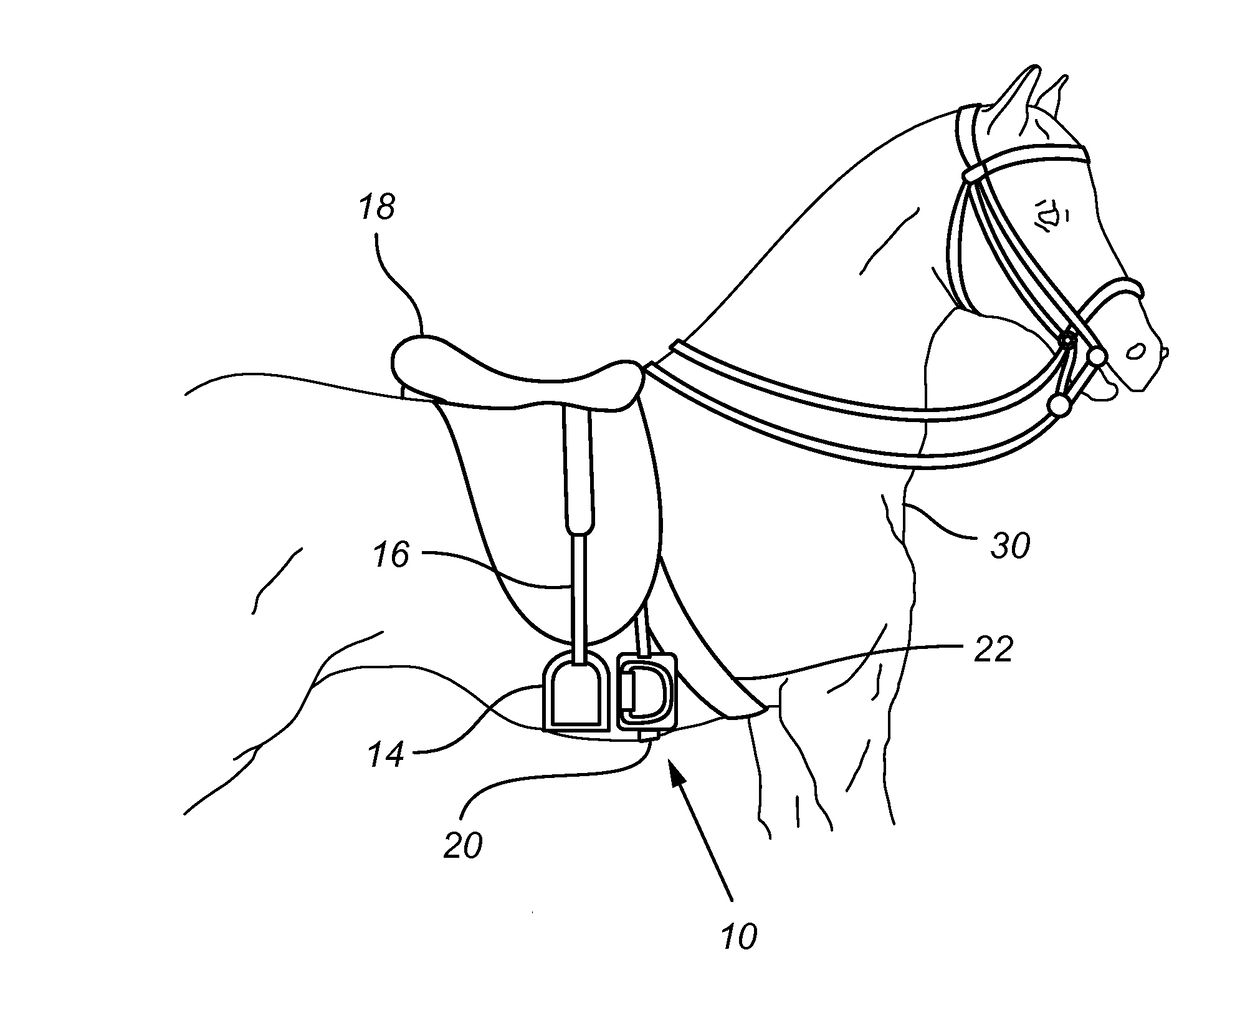 System for use in horseback riding